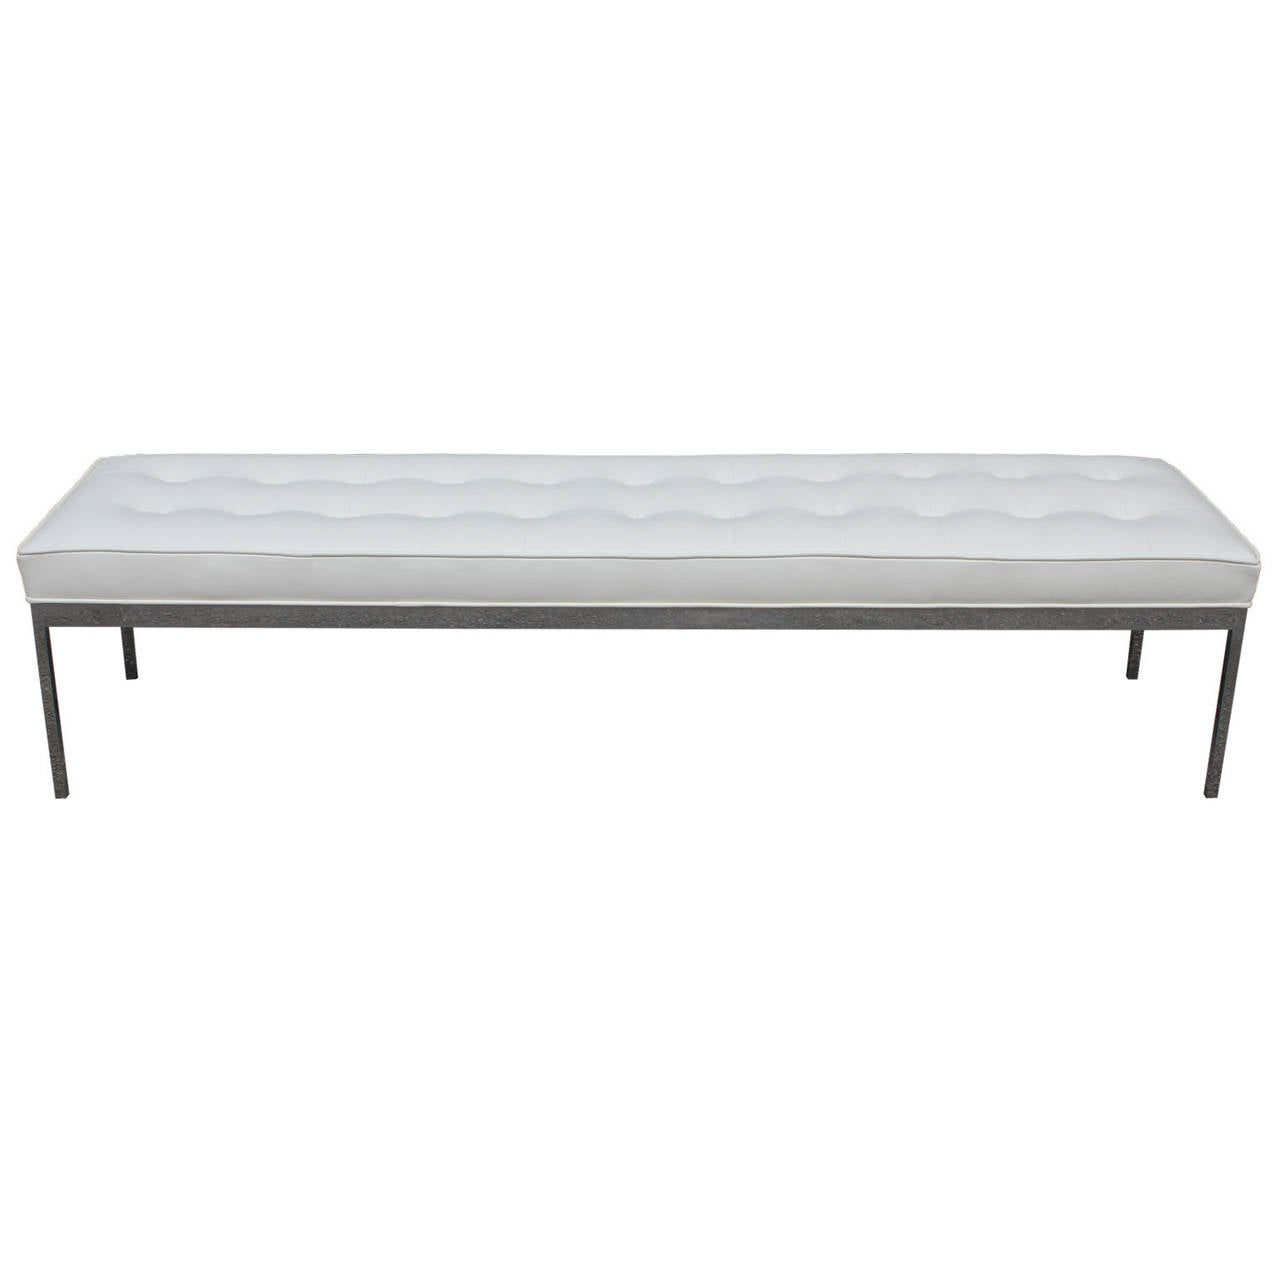 Ultra luxe bench freshly upholstered in white Spinneybeck leather and chrome base. Seat is tufted and piped. Perfect used as a bench or ottoman/coffee table. Extra heavy and well built - In the style of Zographos, Knoll, Milo Baughman